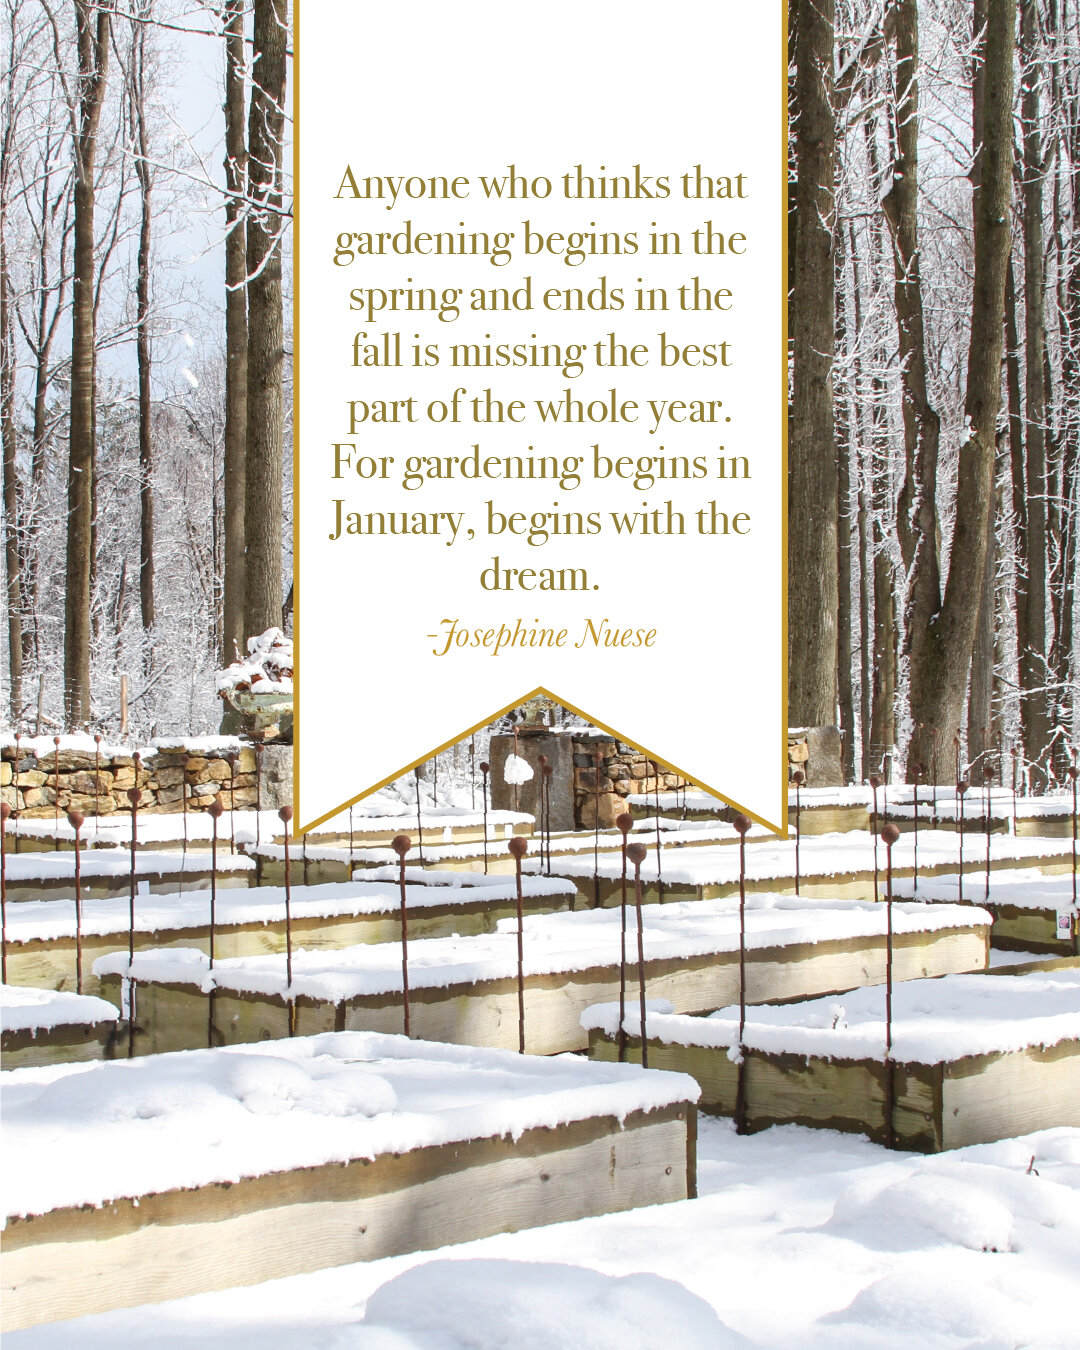 We love this quote by writer and gardener Josephine Nuese from her book The Country Garden. Josephine was born in 1901 in Edison, NJ and went on to work at Harper's Bazaar, Vogue, and the New Yorker before moving to Connecticut to raise her children 